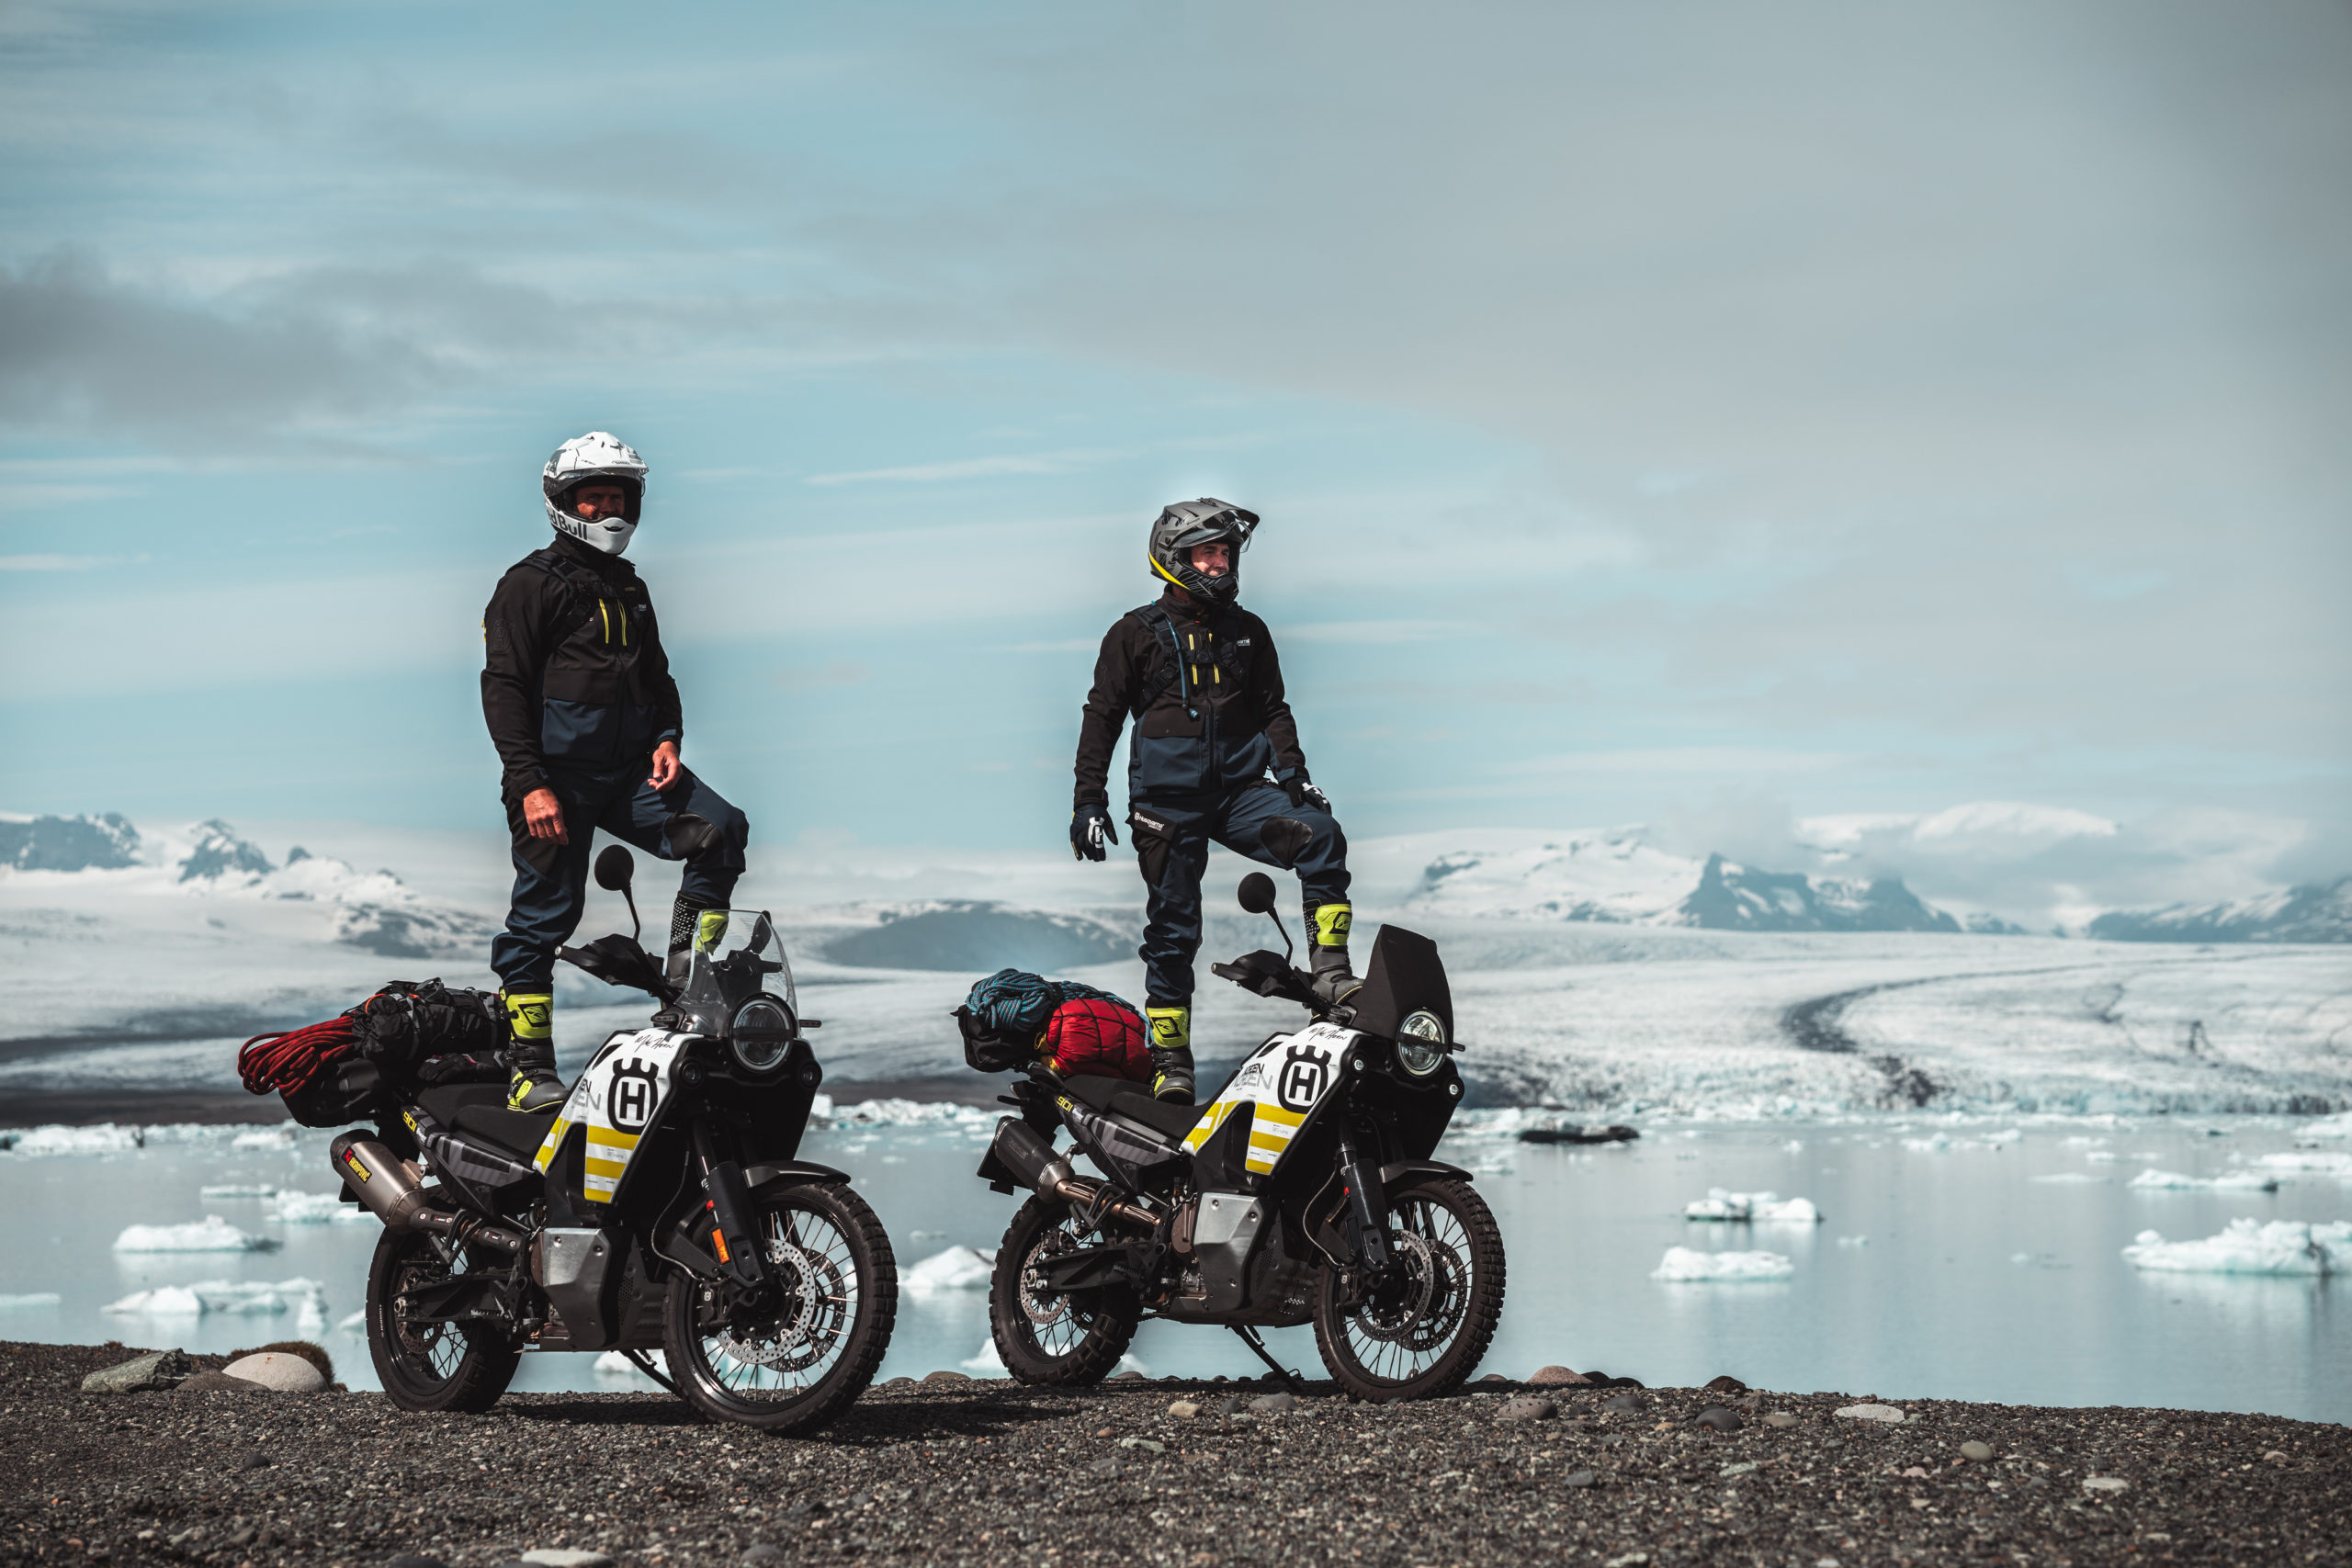 Rally legend Cyril Despres and extreme explorer Mike Horn putting the all-new Norden 901 through their paces